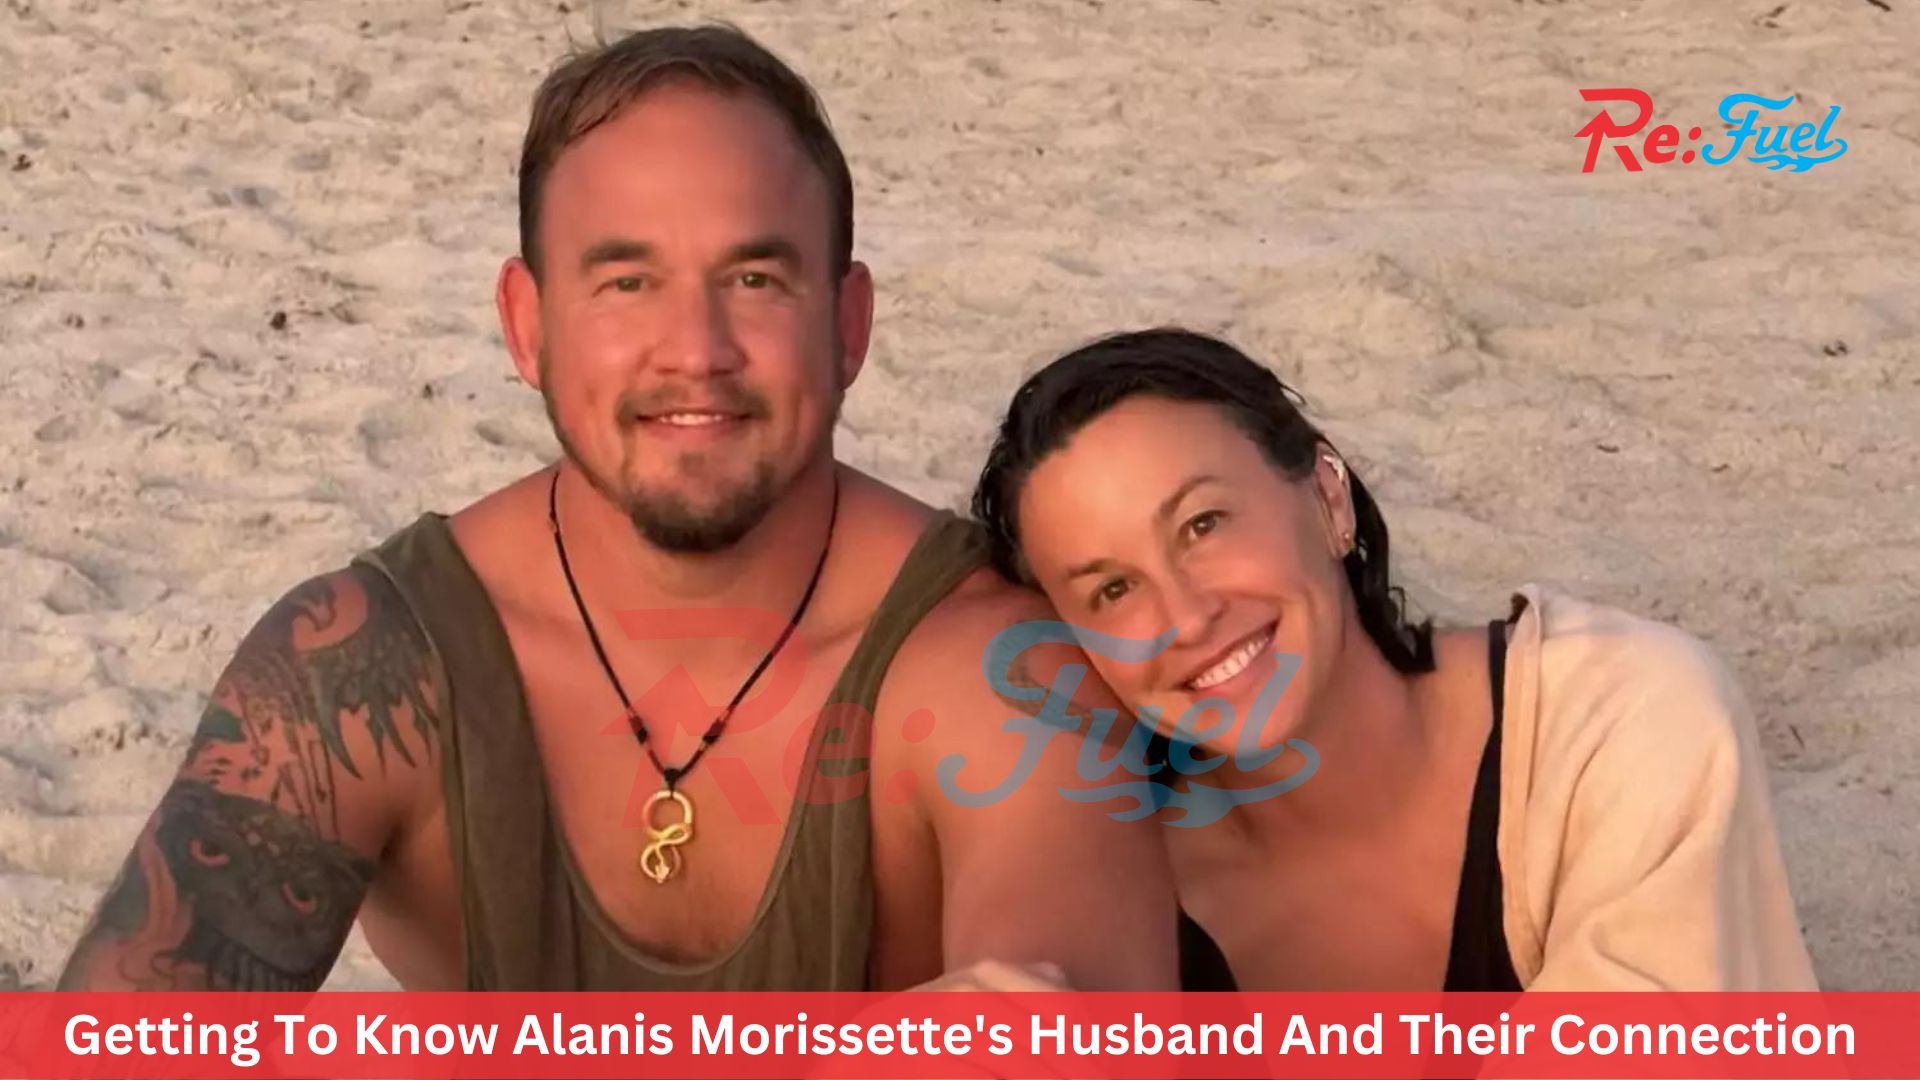 Getting To Know Alanis Morissette's Husband And Their Connection